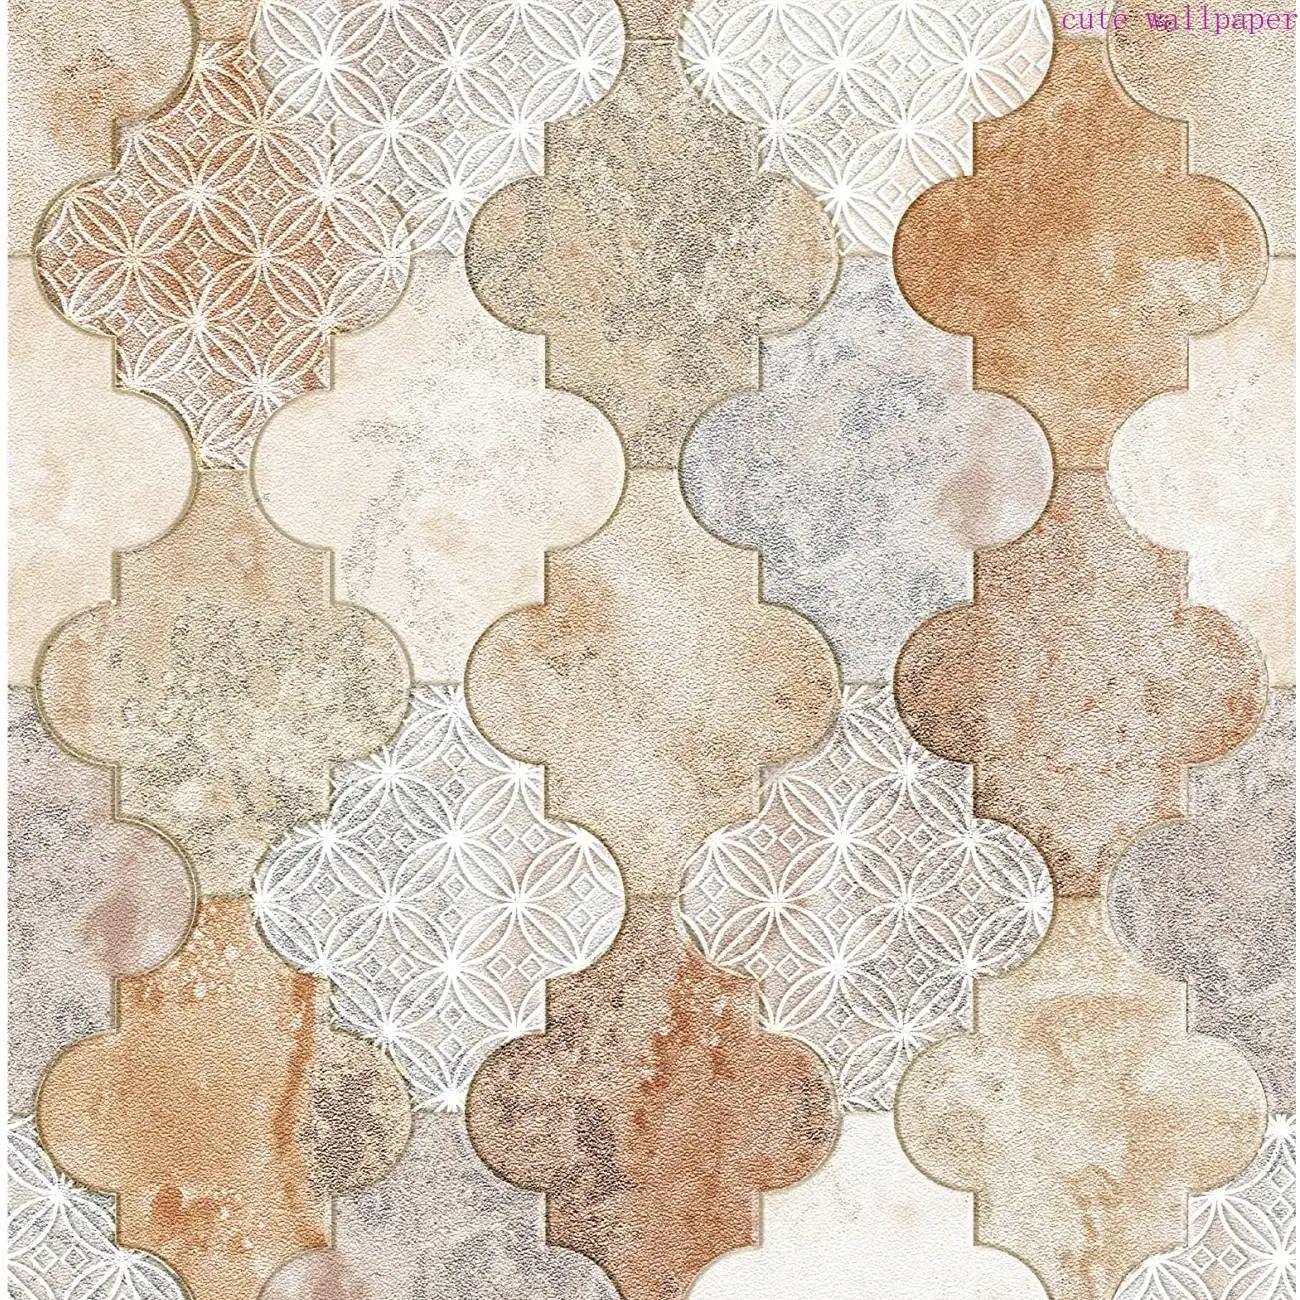 HaoHome Peel and Stick Wallpaper Handpainting Trellis Marble Stone Extra Thick Self-Adhesive Prepasted Wallpaper Wall Mural haohome vintage gray brick wallpaper self adhesive stone peel and stick wallpaper brick faux textured wallpaper stone stickers